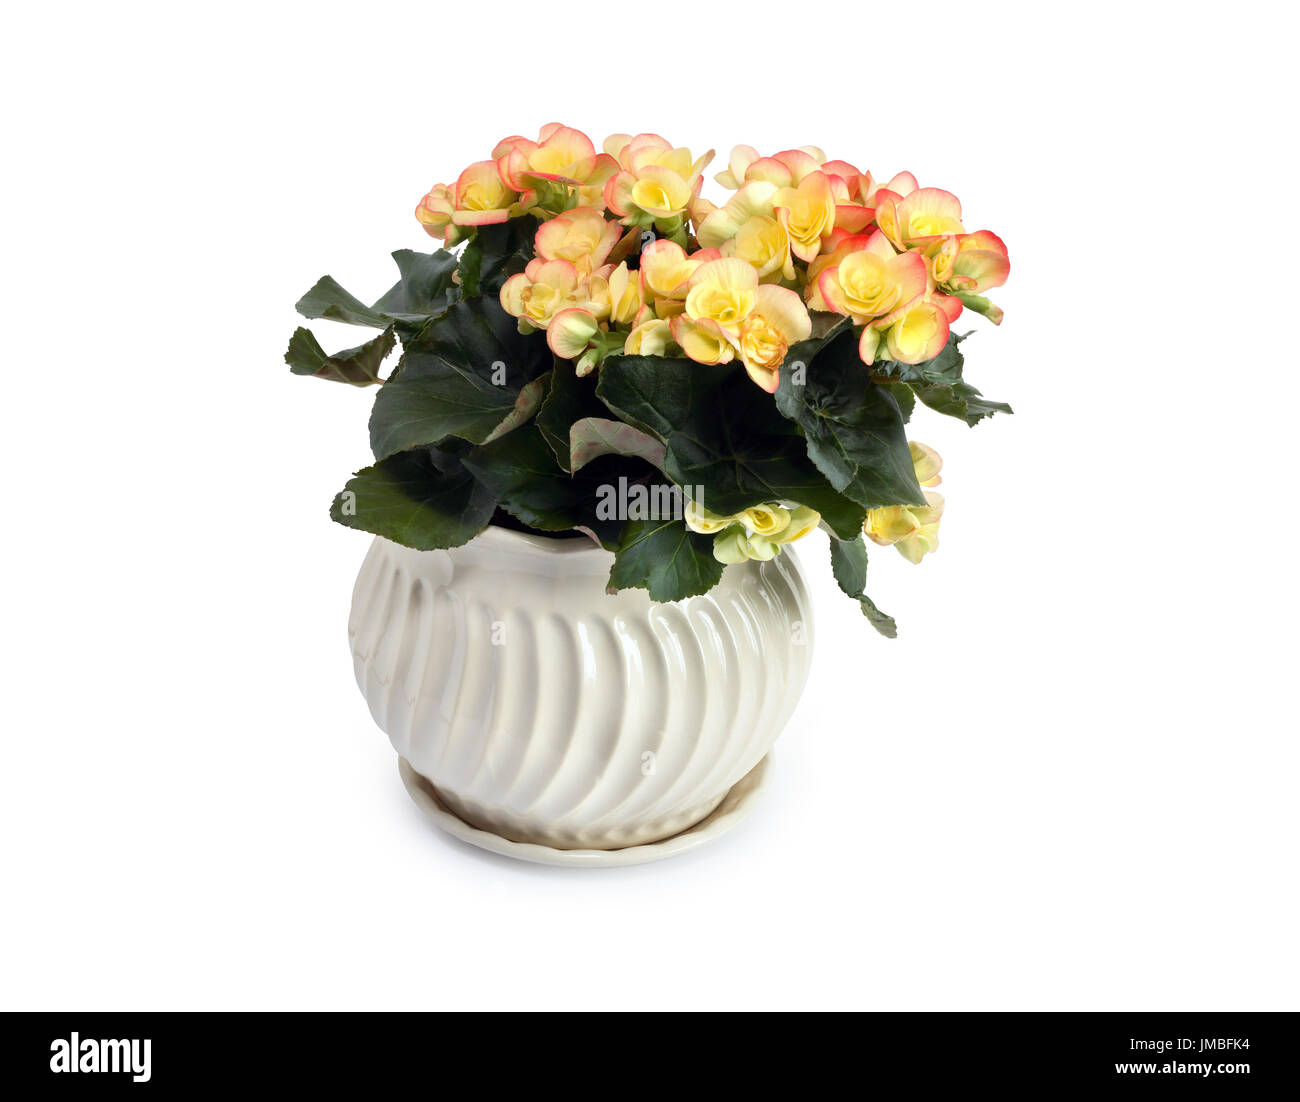 Nice yellow begonia flowers in flowerpot on white background. Isolated with clipping path Stock Photo